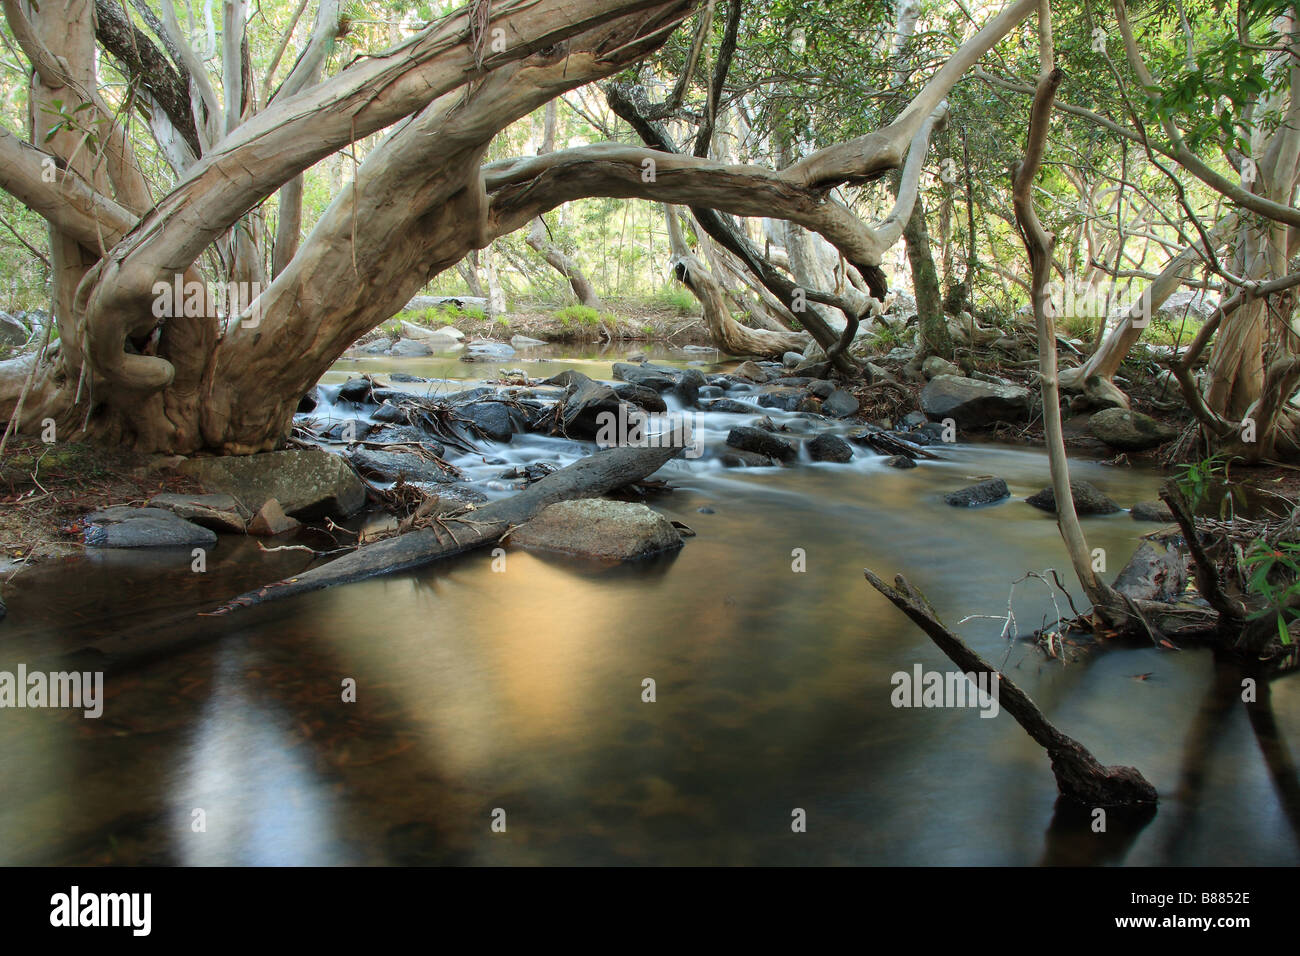 A section of Davies Creek near Carns, North Queensland Stock Photo